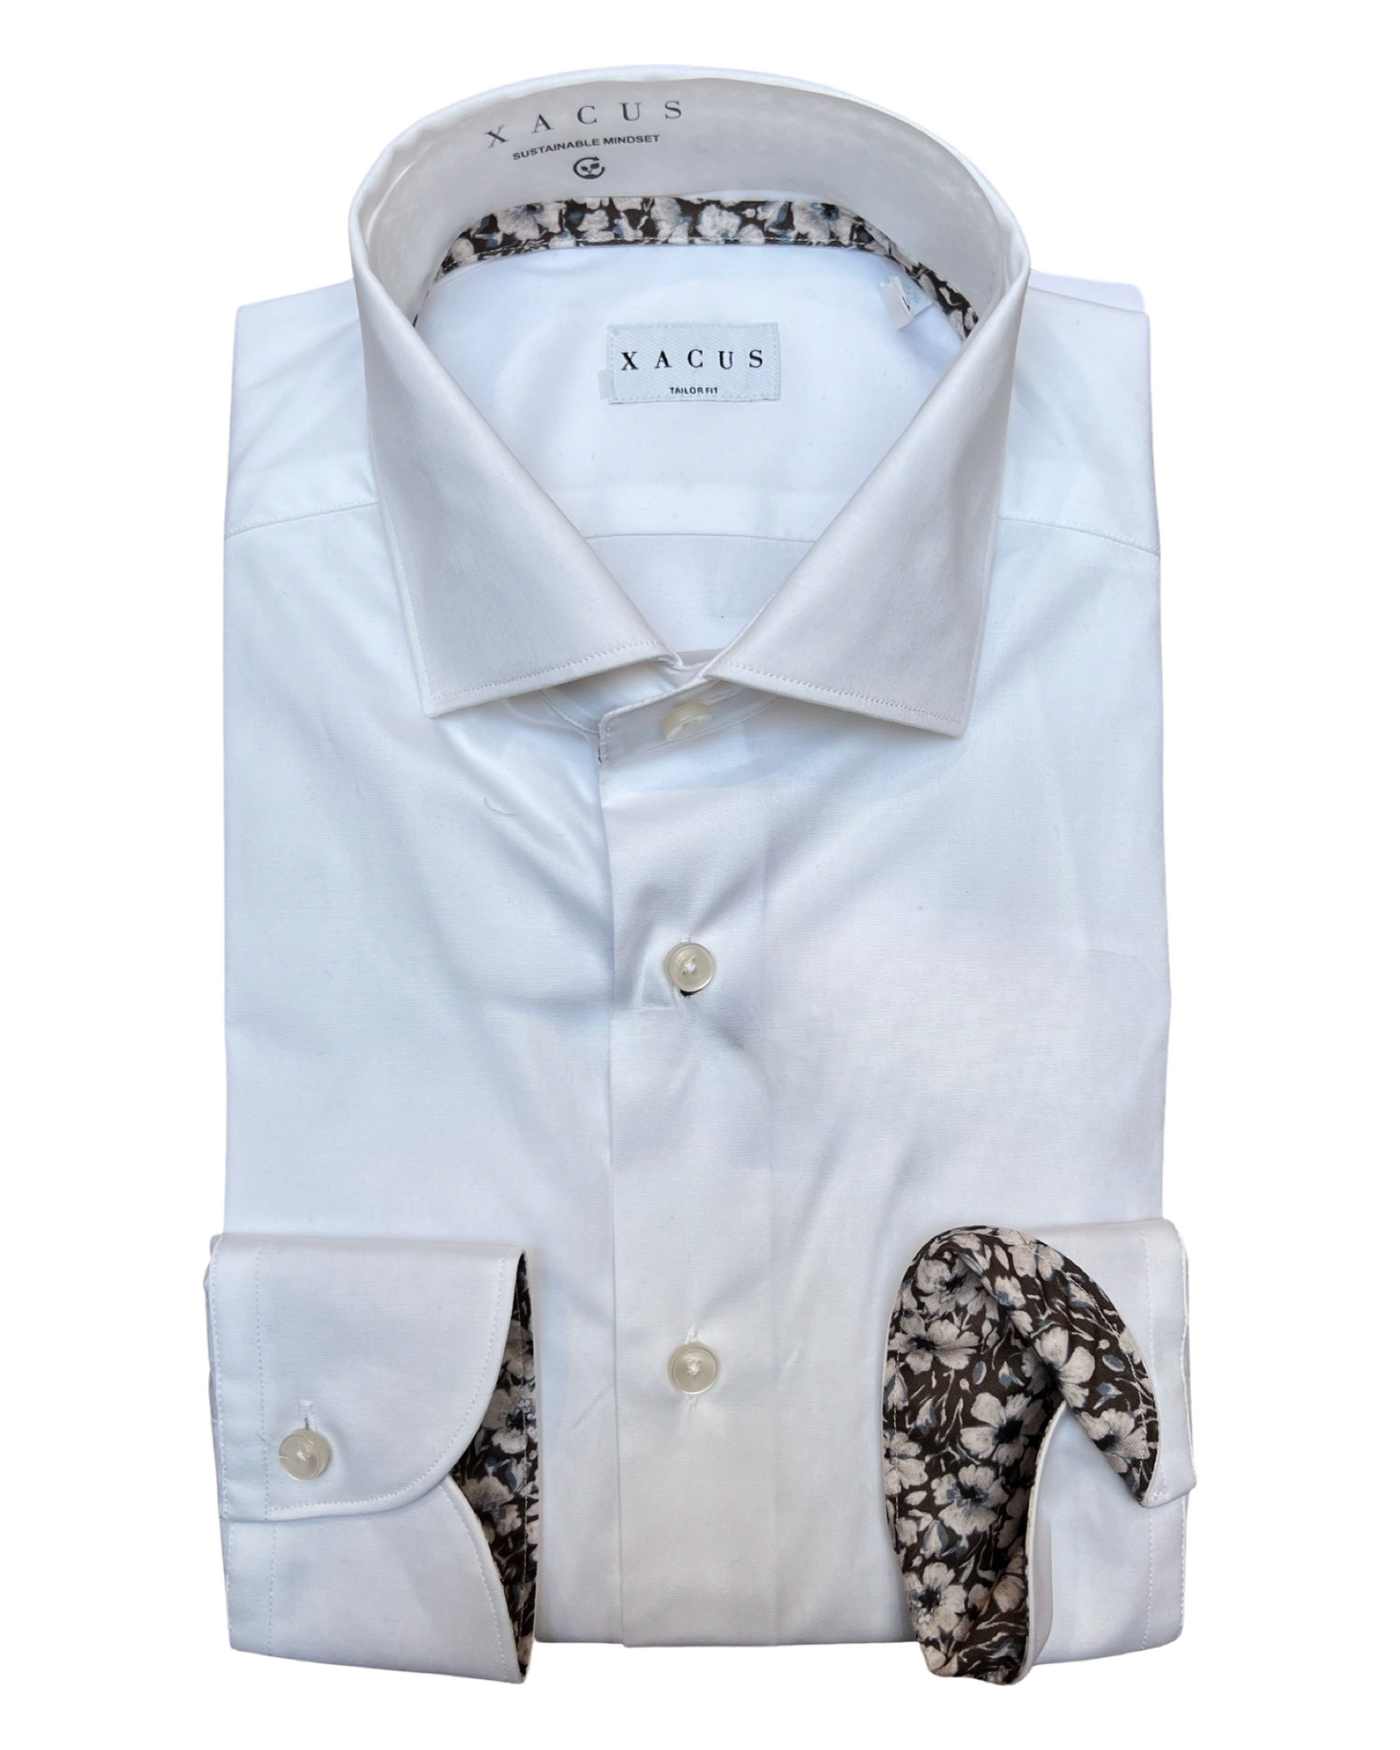 XACUS White Shirt with Contrast